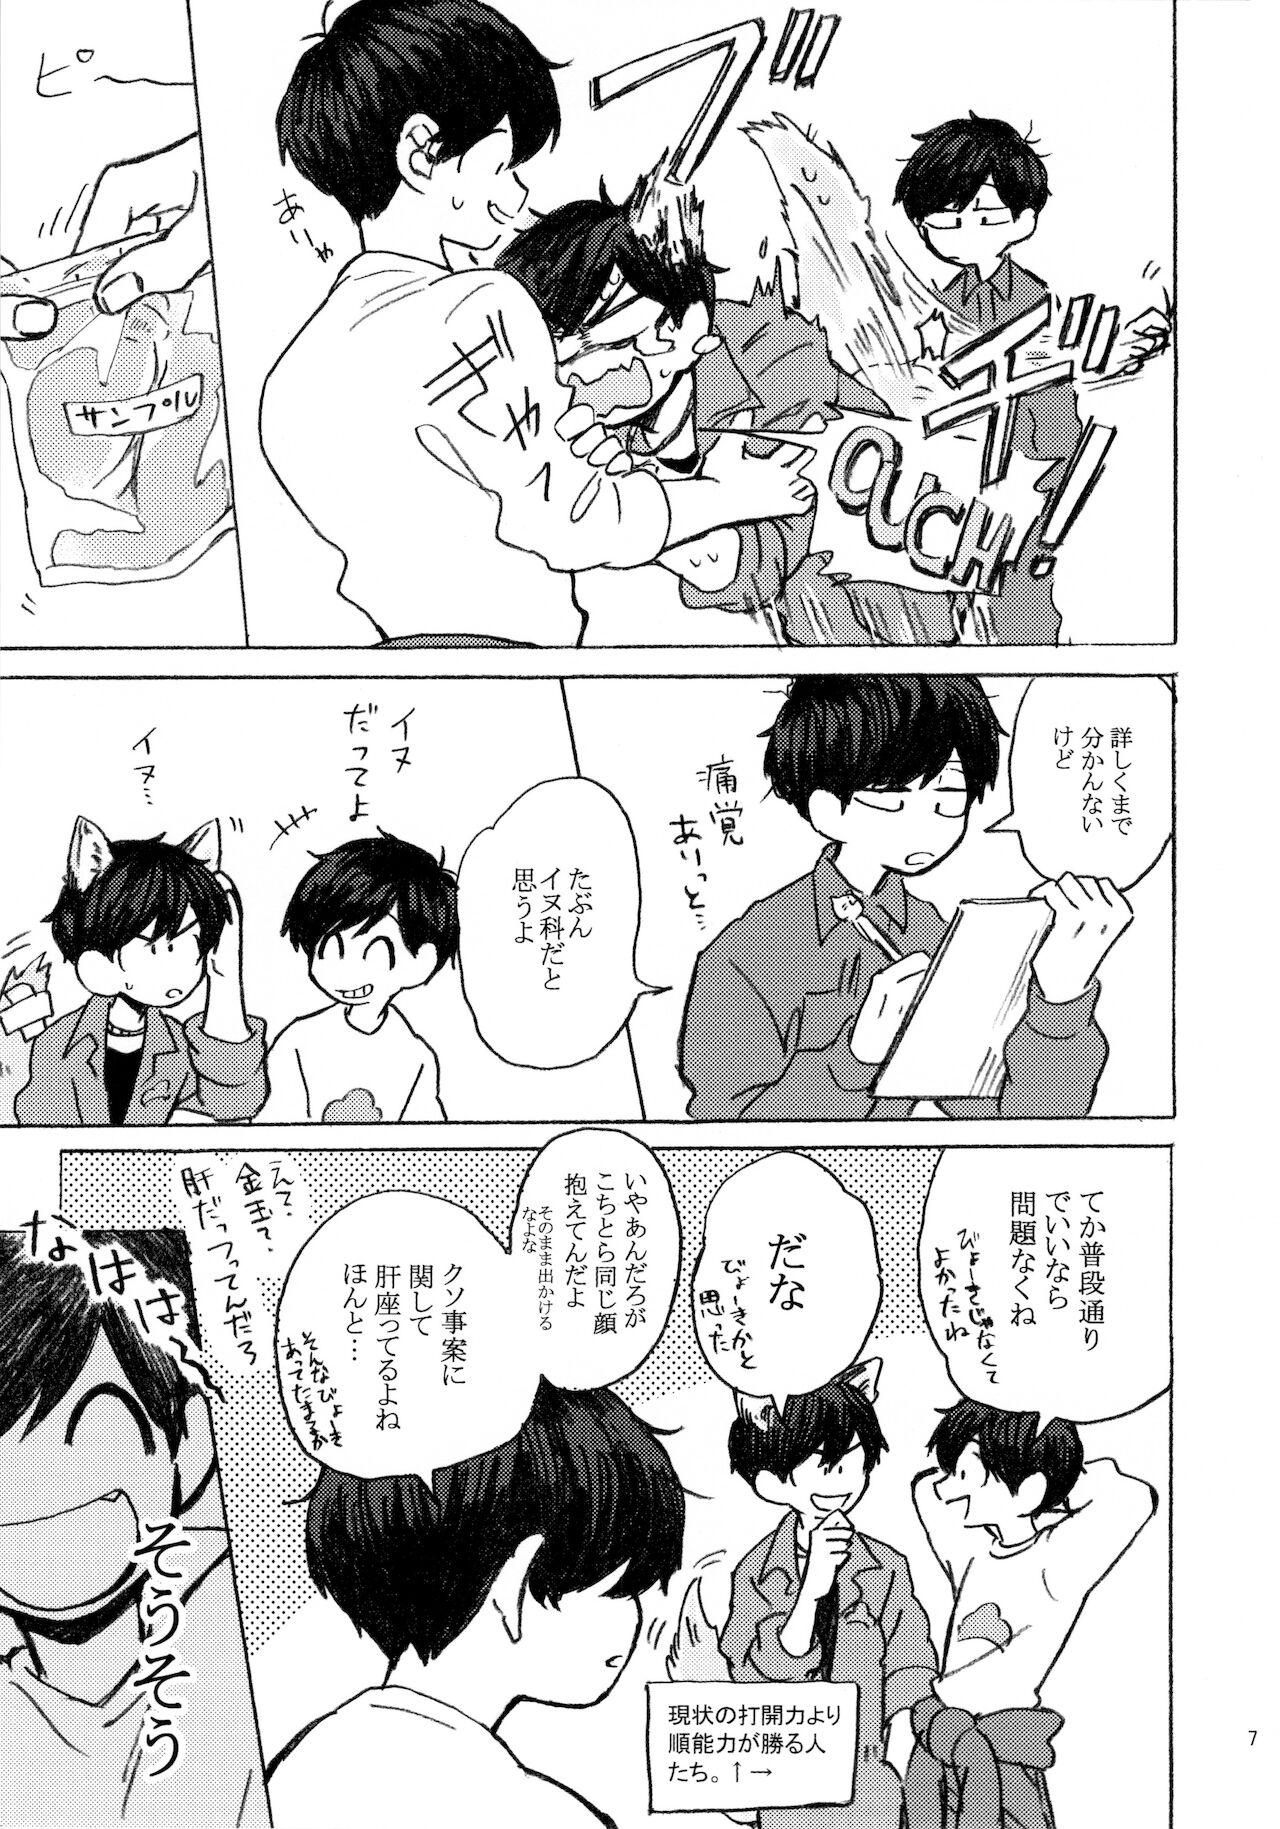 Penetration PLEASE WAG YOUR TAIL ONLY TO ME. - Osomatsu-san Best - Page 8